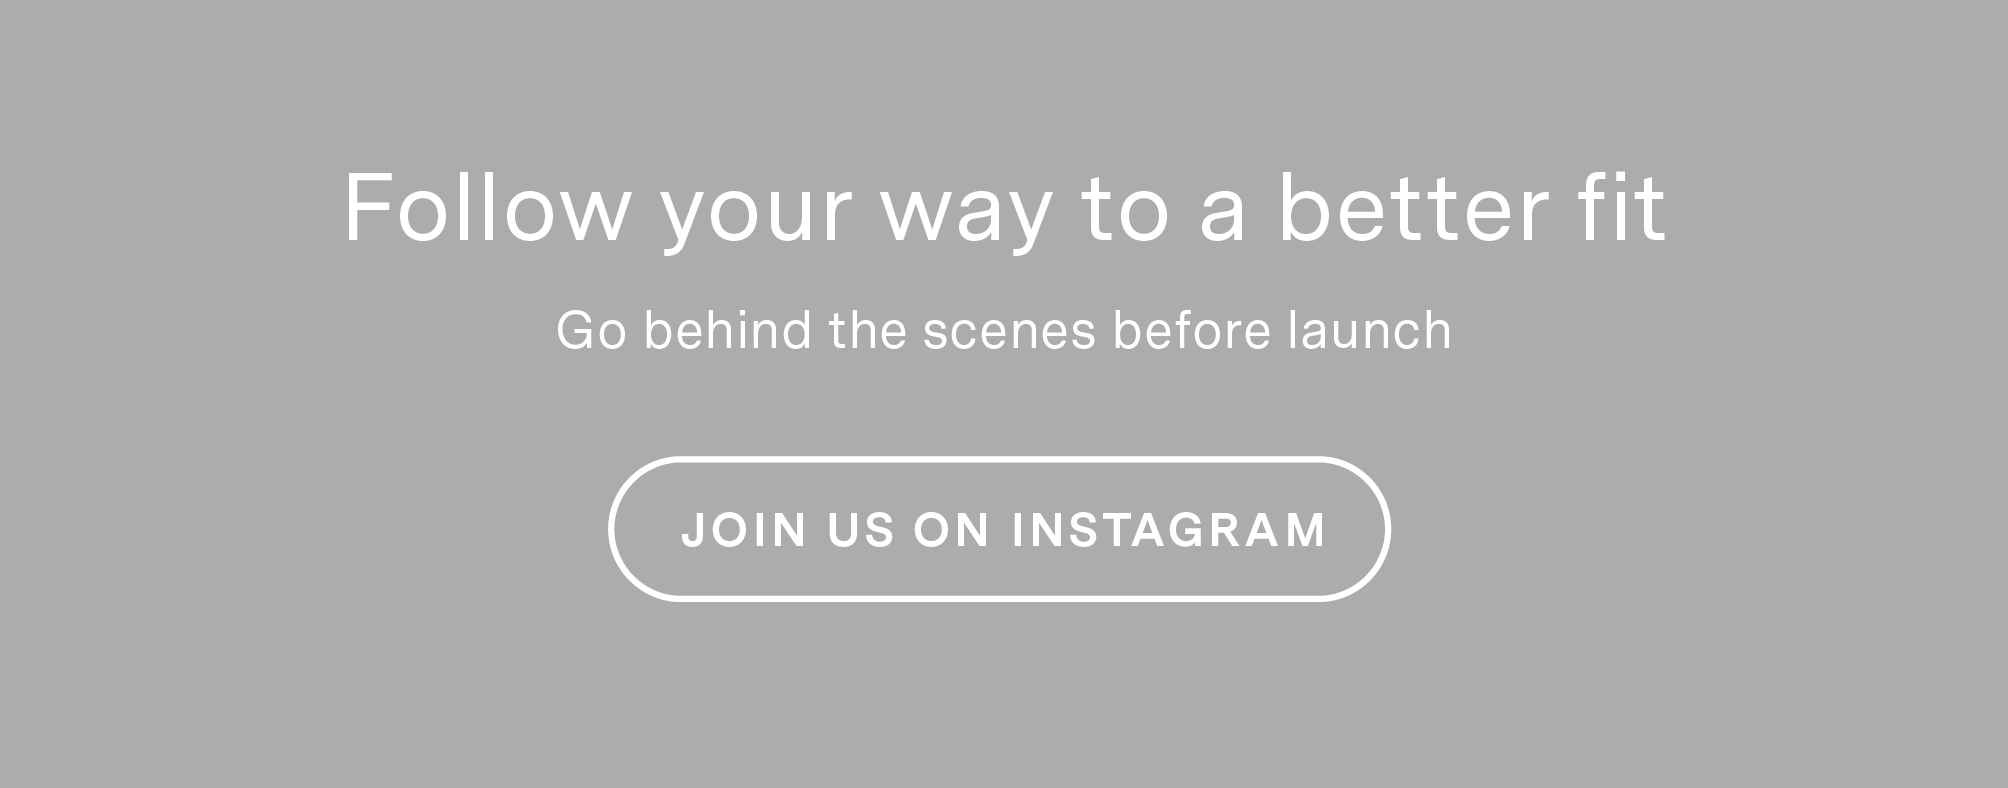 Follow your way to a better fit. Go behind the scenes before launch. Join us on Instagram.